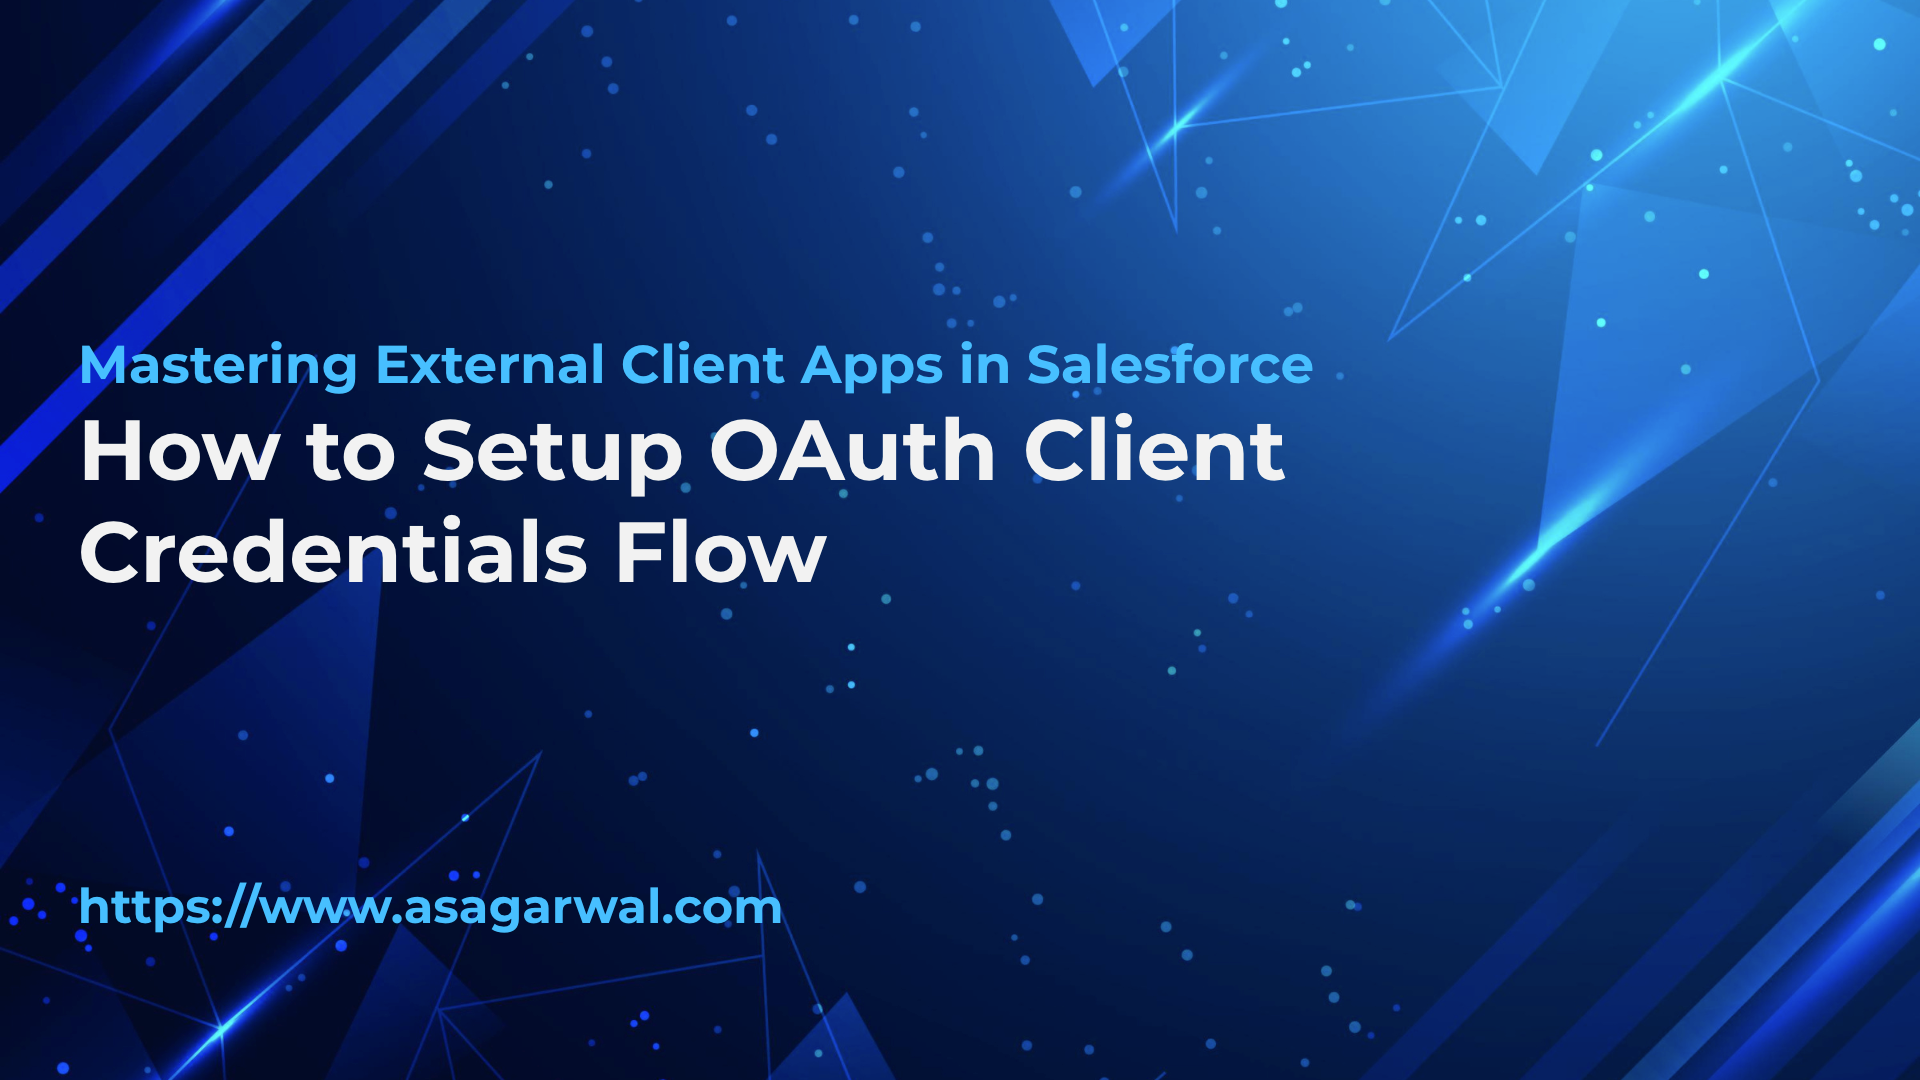 How to Setup External Client Apps with OAuth Client Credentials Flow